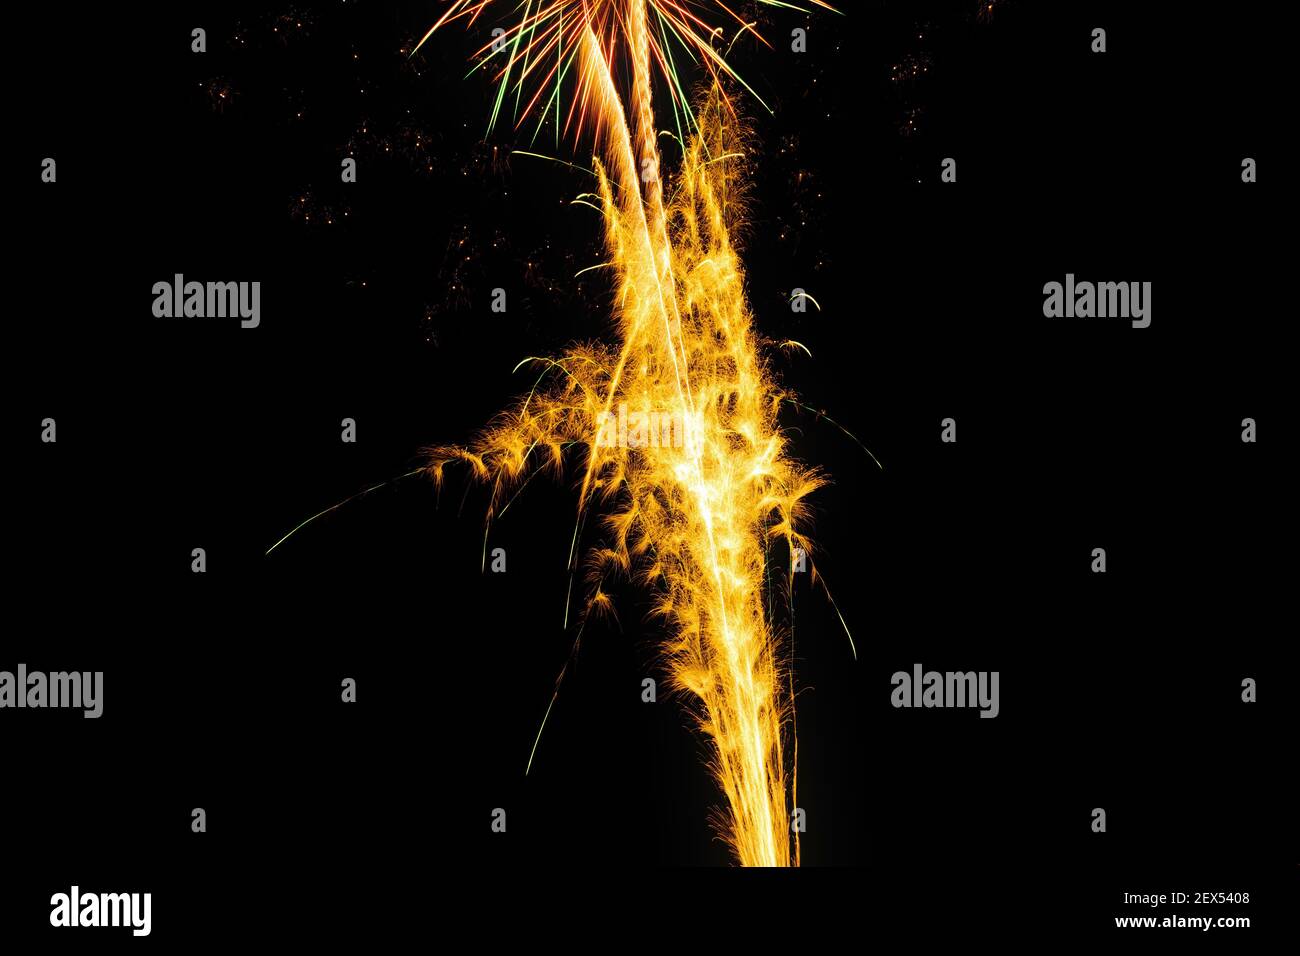 Image with a black background prepared to edit text of a firework, formed by yellow traces. Stock Photo